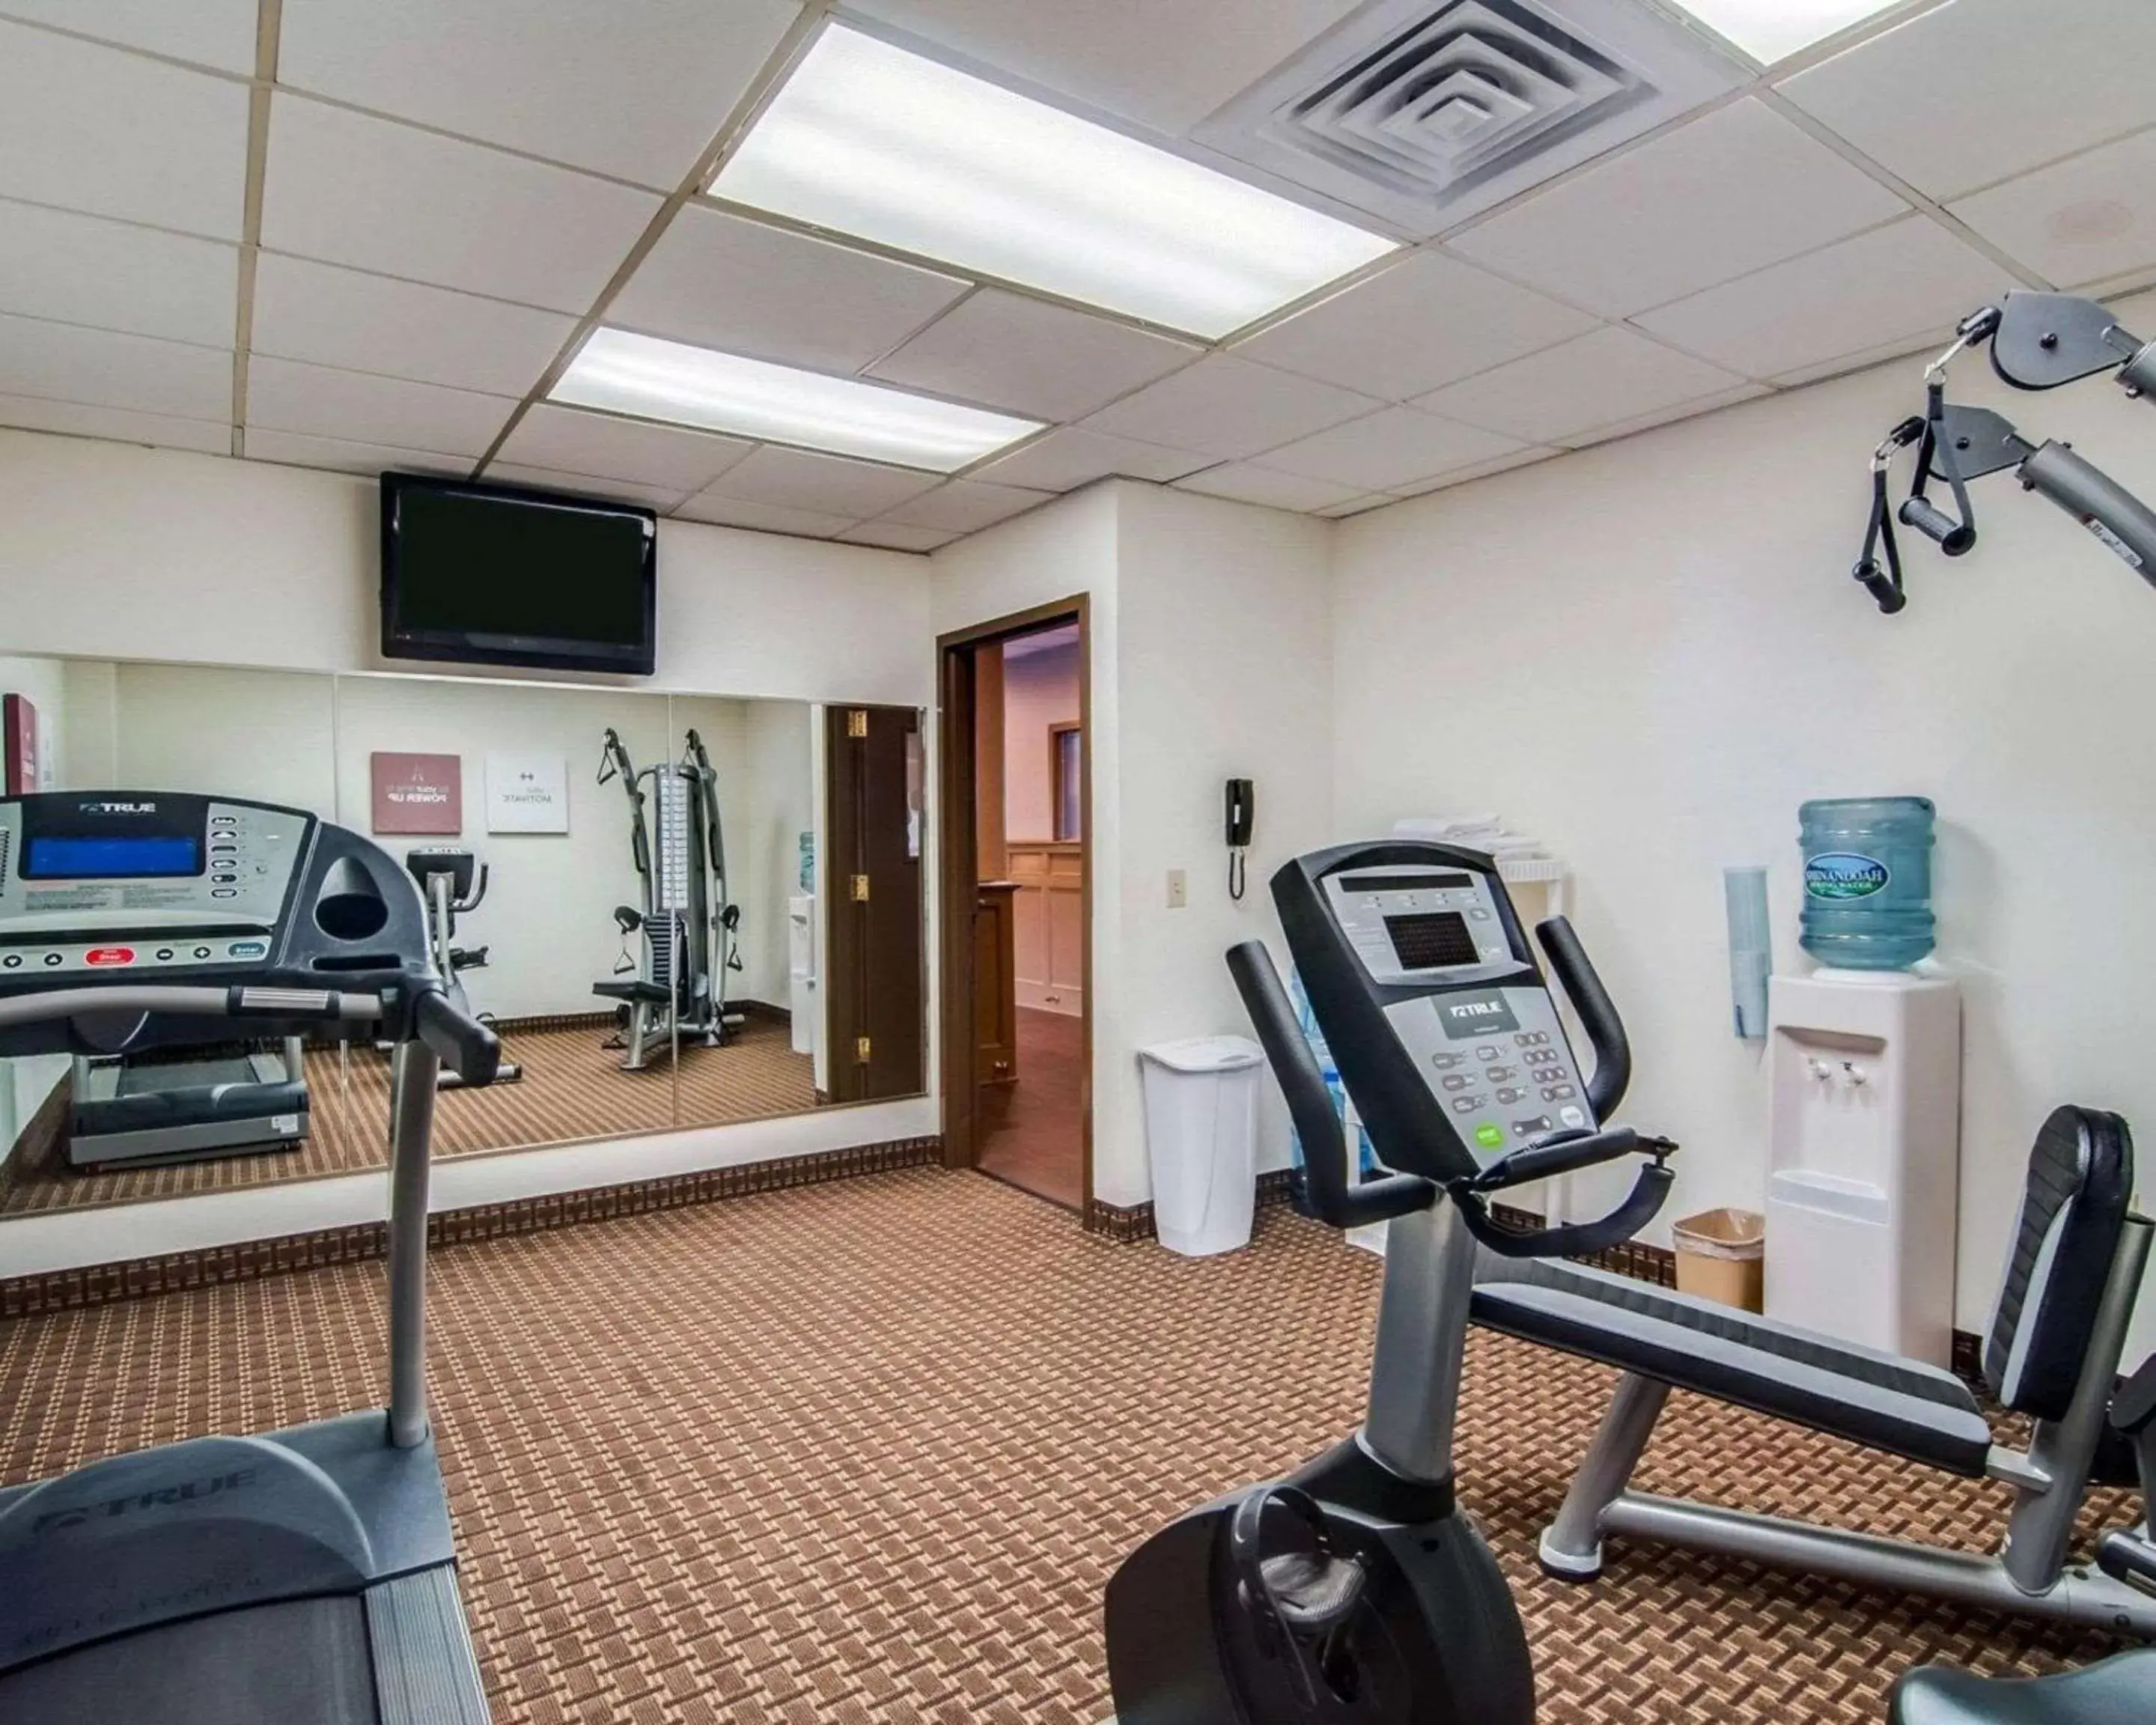 Fitness centre/facilities, Fitness Center/Facilities in Comfort Inn & Suites Raphine - Lexington near I-81 and I-64